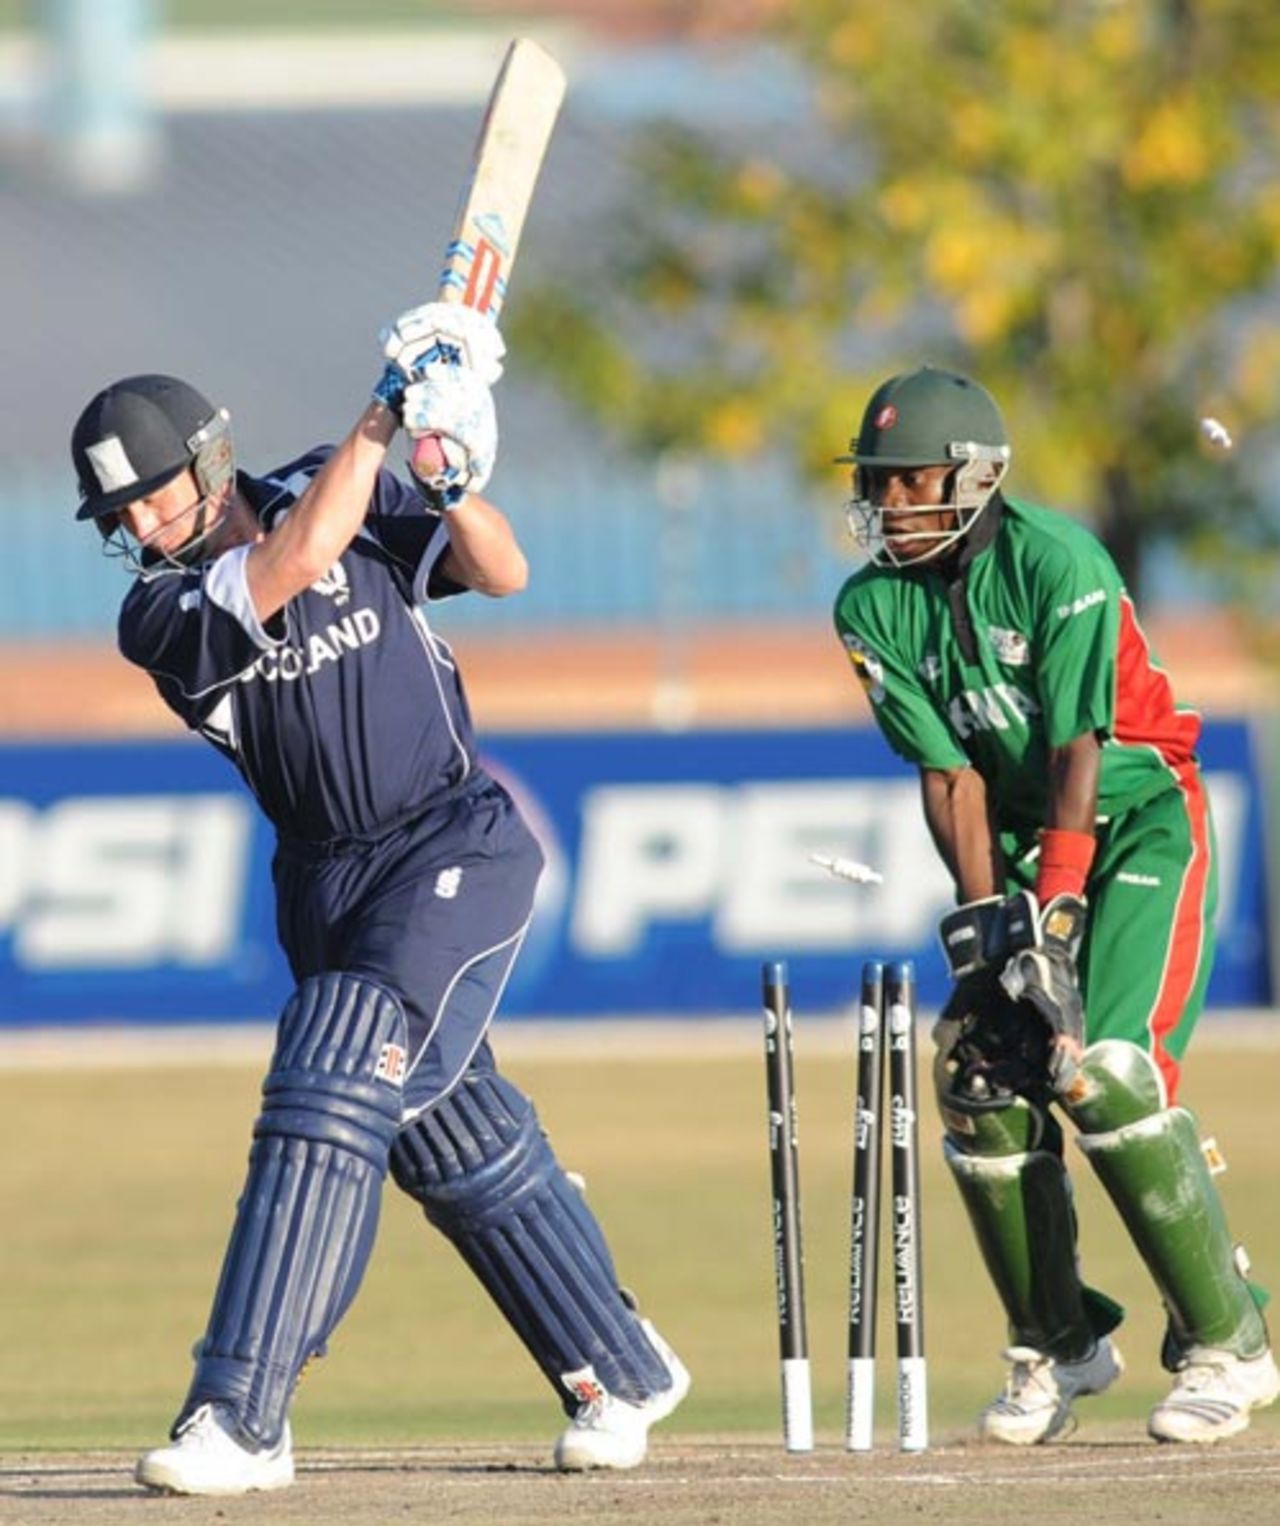 Not a replay he'd like to see: Scotland's John Blain is bowled for 10, Kenya v Scotland, ICC World Cup Qualifiers, Super Eights, Krugersdorp, April 13, 2009
